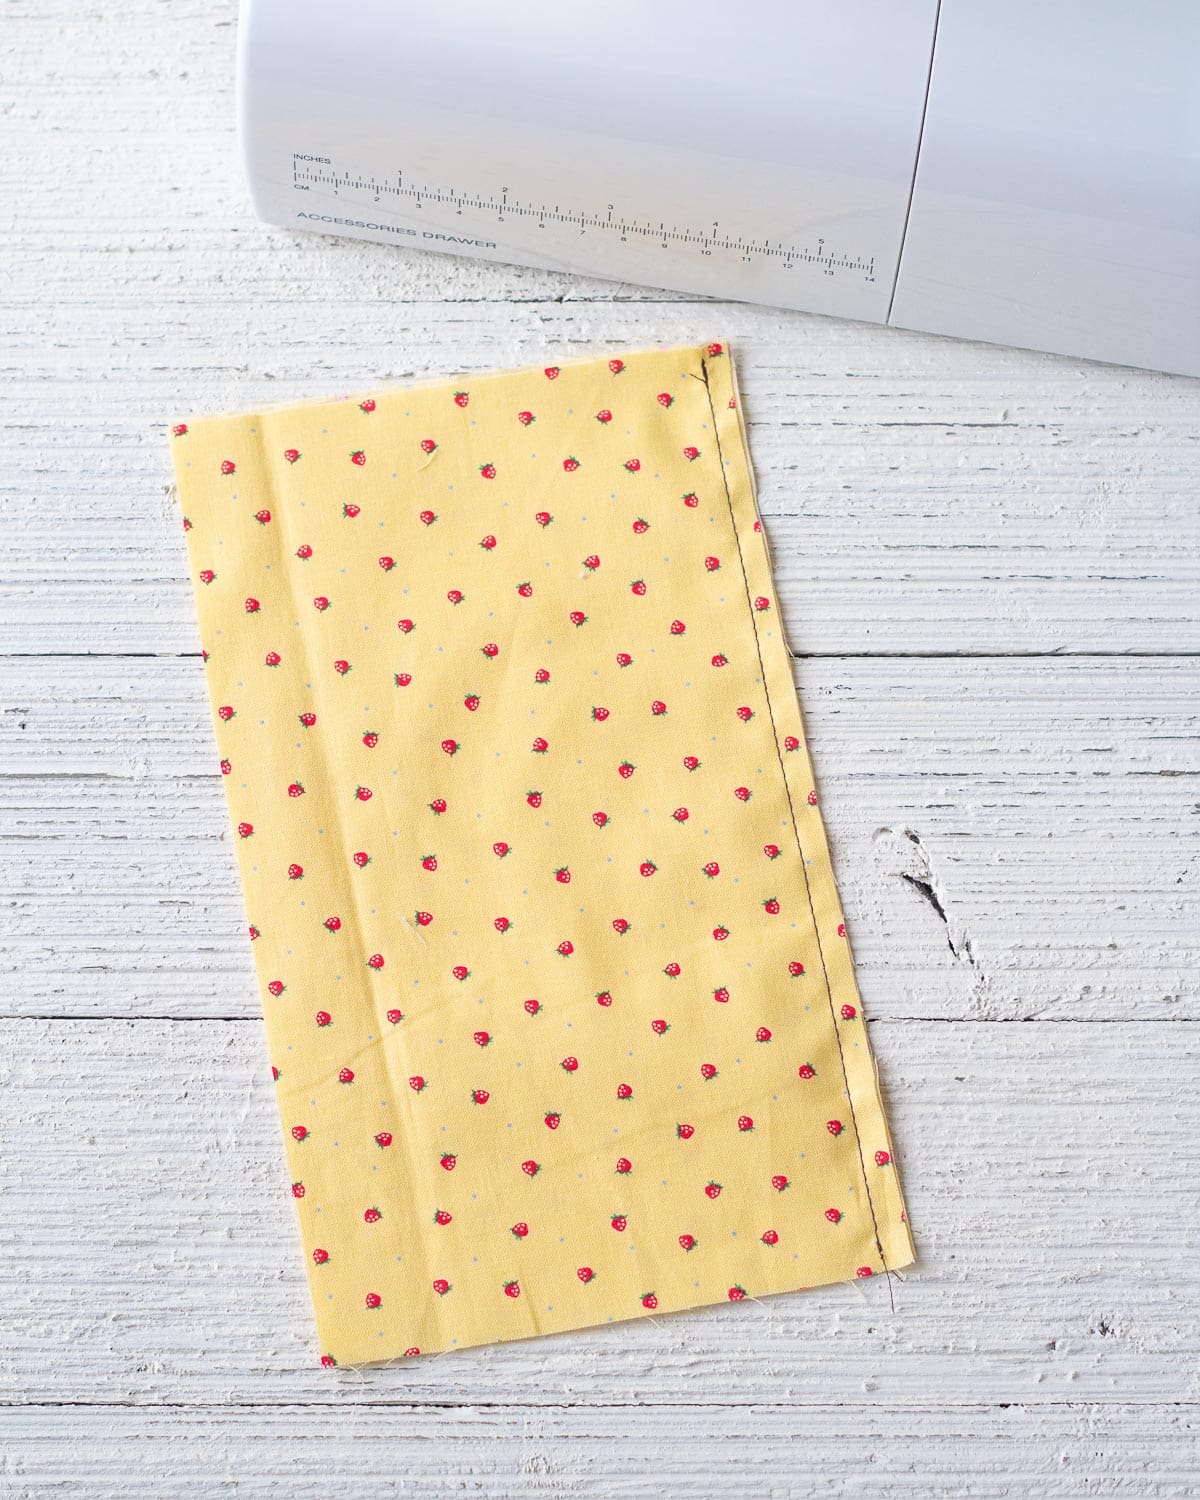 A seam sewn with contrasting thread on a rectangle of yellow fabric.